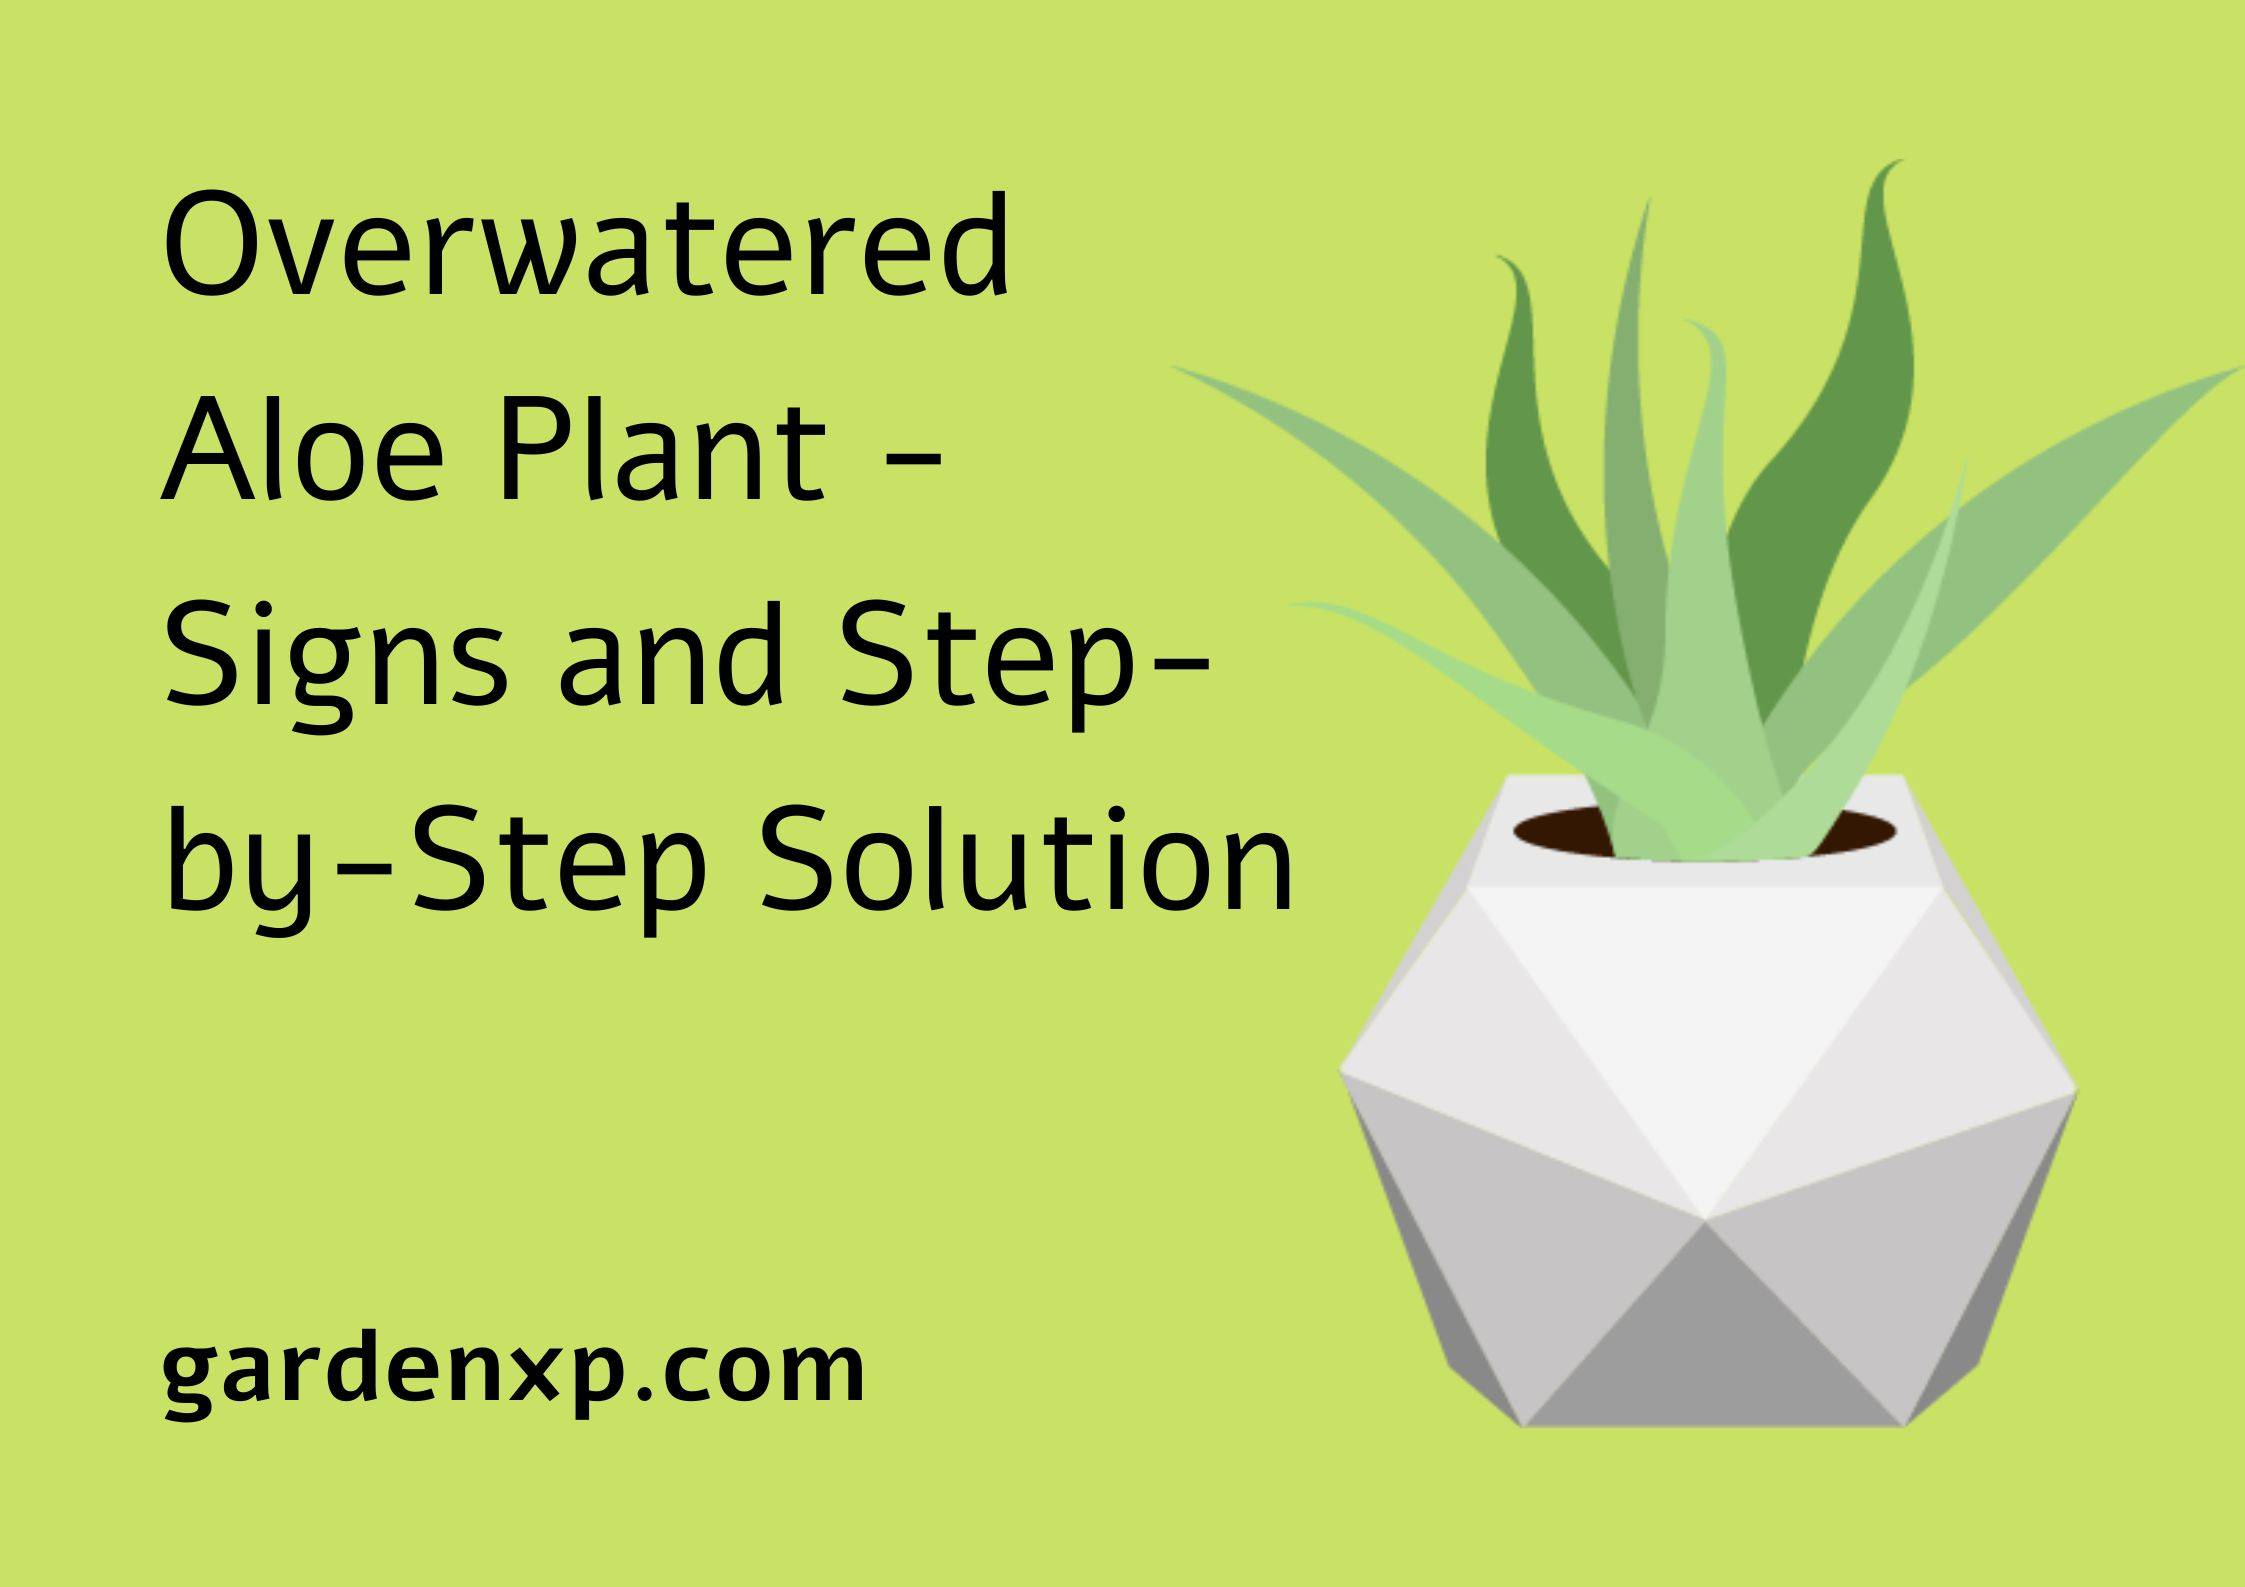 Overwatered Aloe Plant - Signs and Step-by-Step Solution